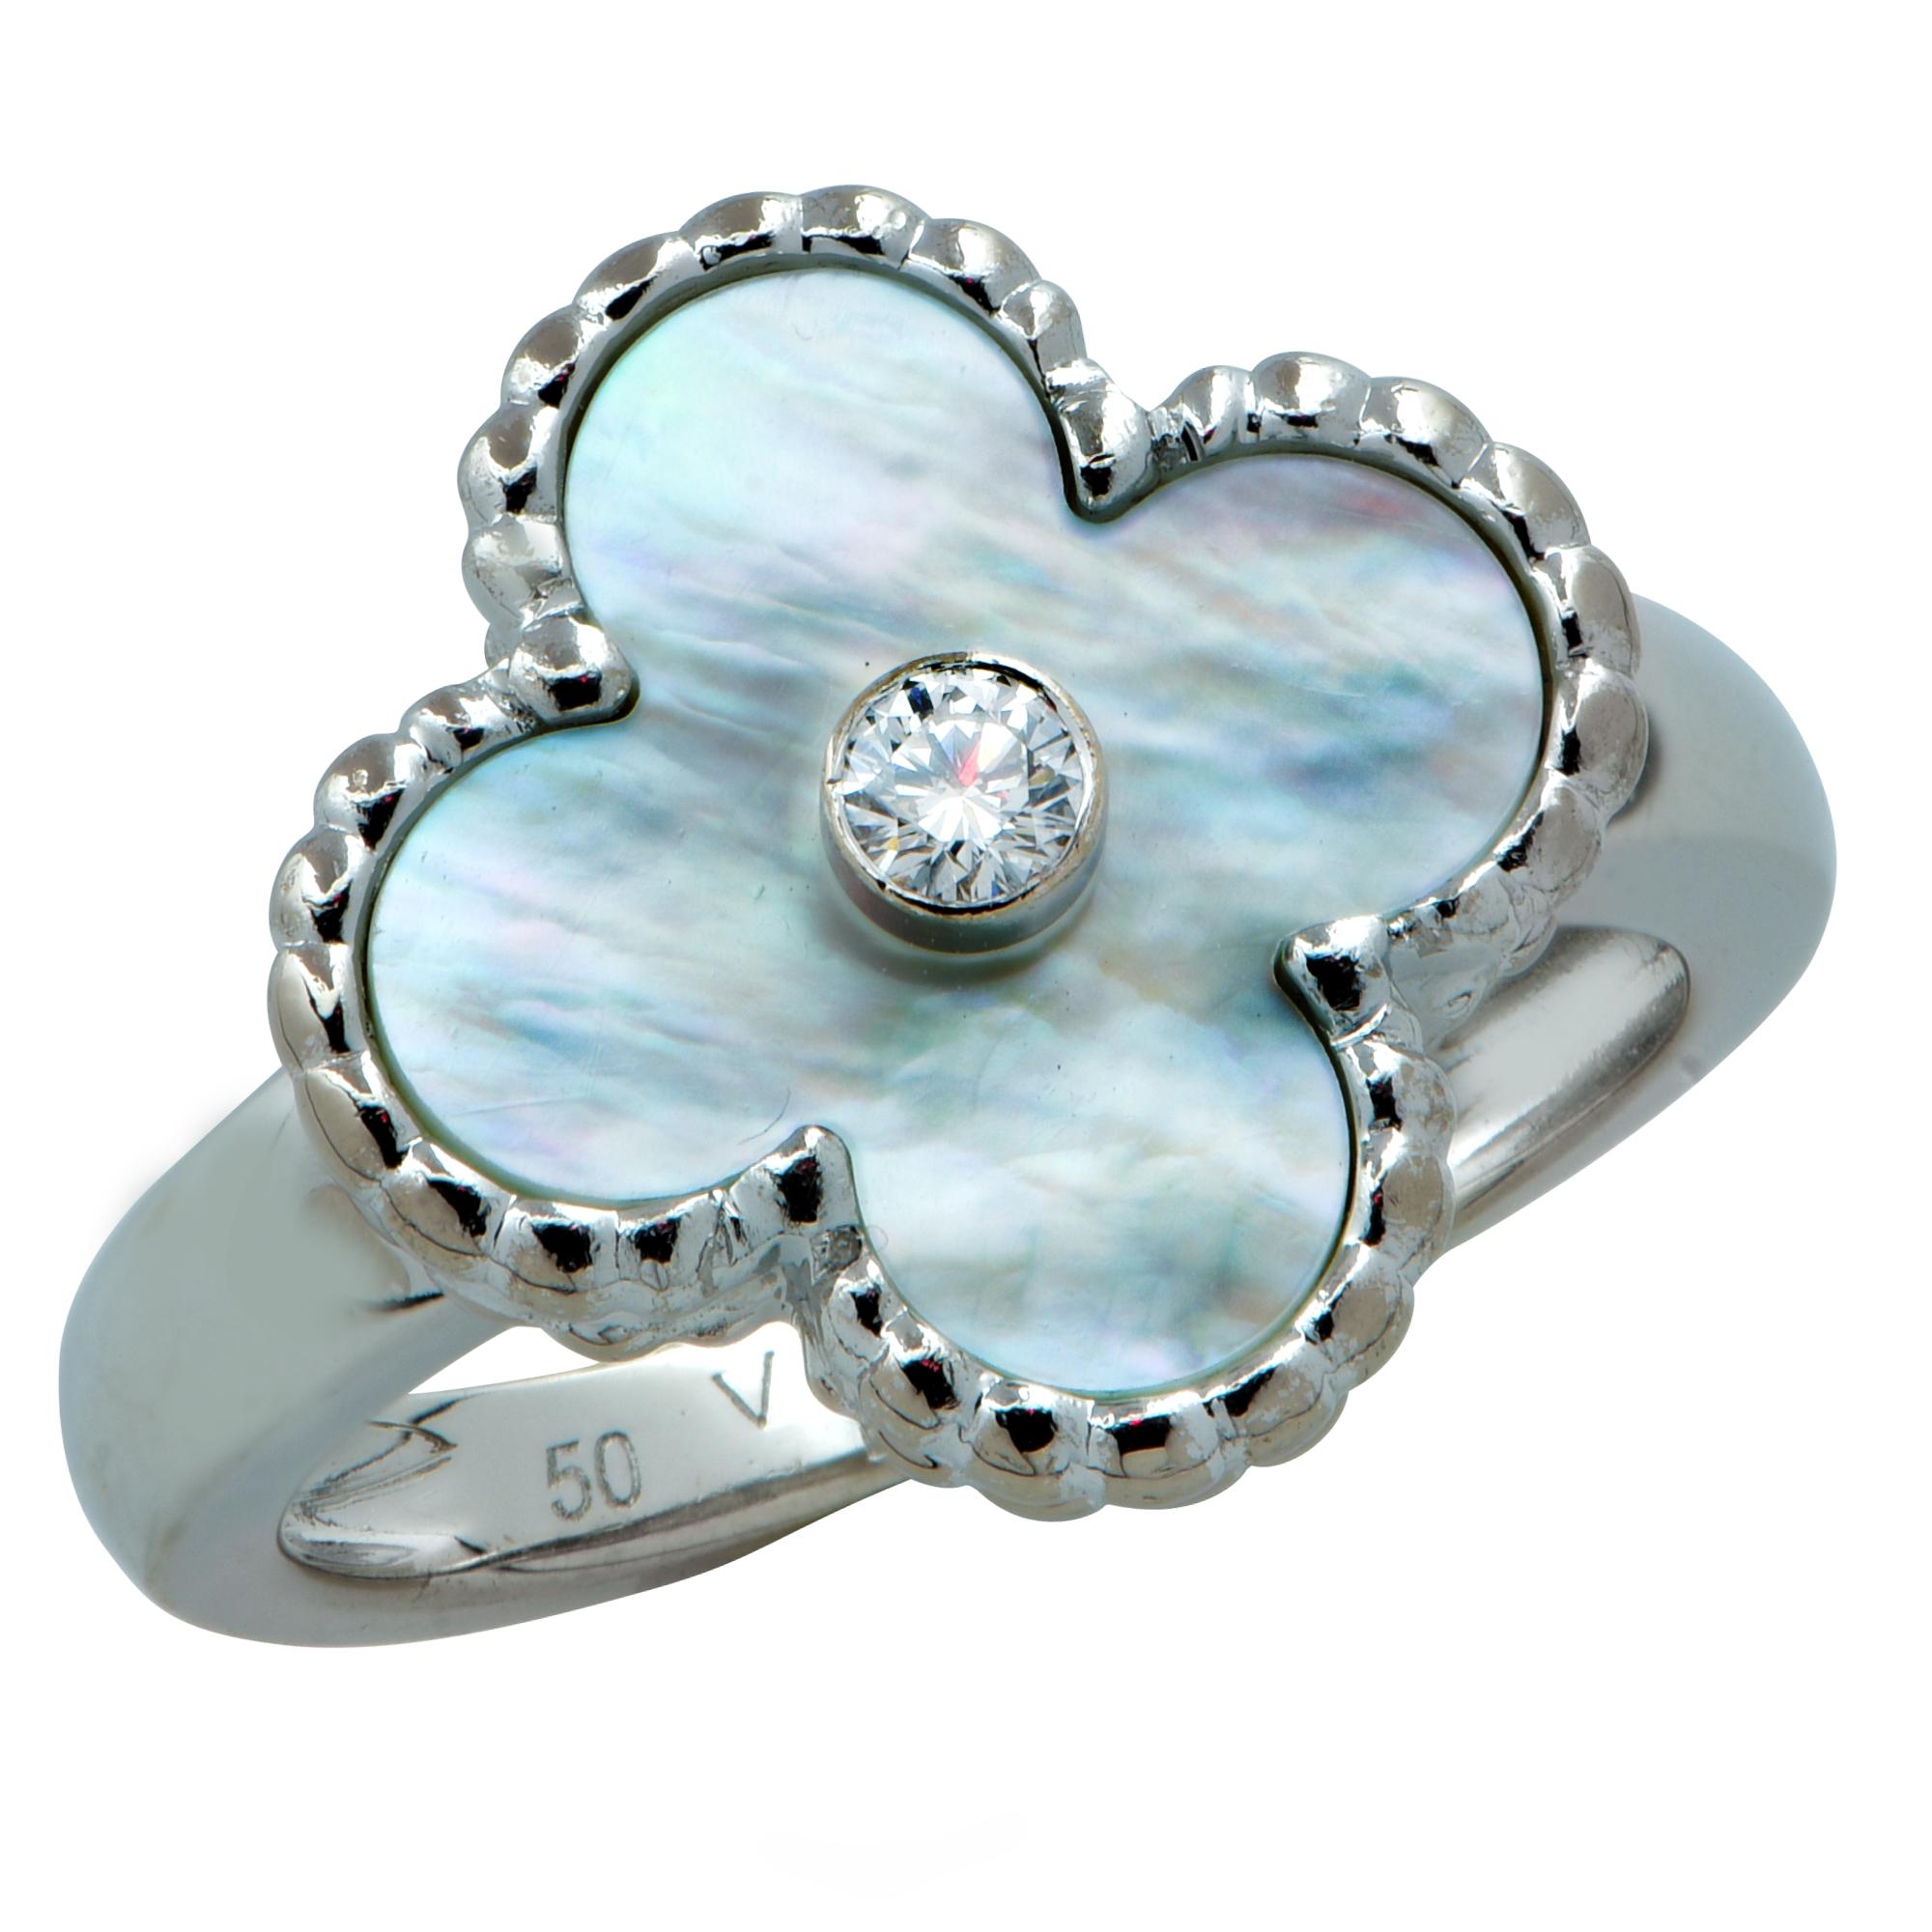 This stunning Van Cleef & Arpels Vintage Alhambra ring crafted in18 Karat white gold features a white mother-of-pearl motif inspired by the clover leaf, embellished with a round brilliant cut diamond weighing approximately .06cts, F color VVS